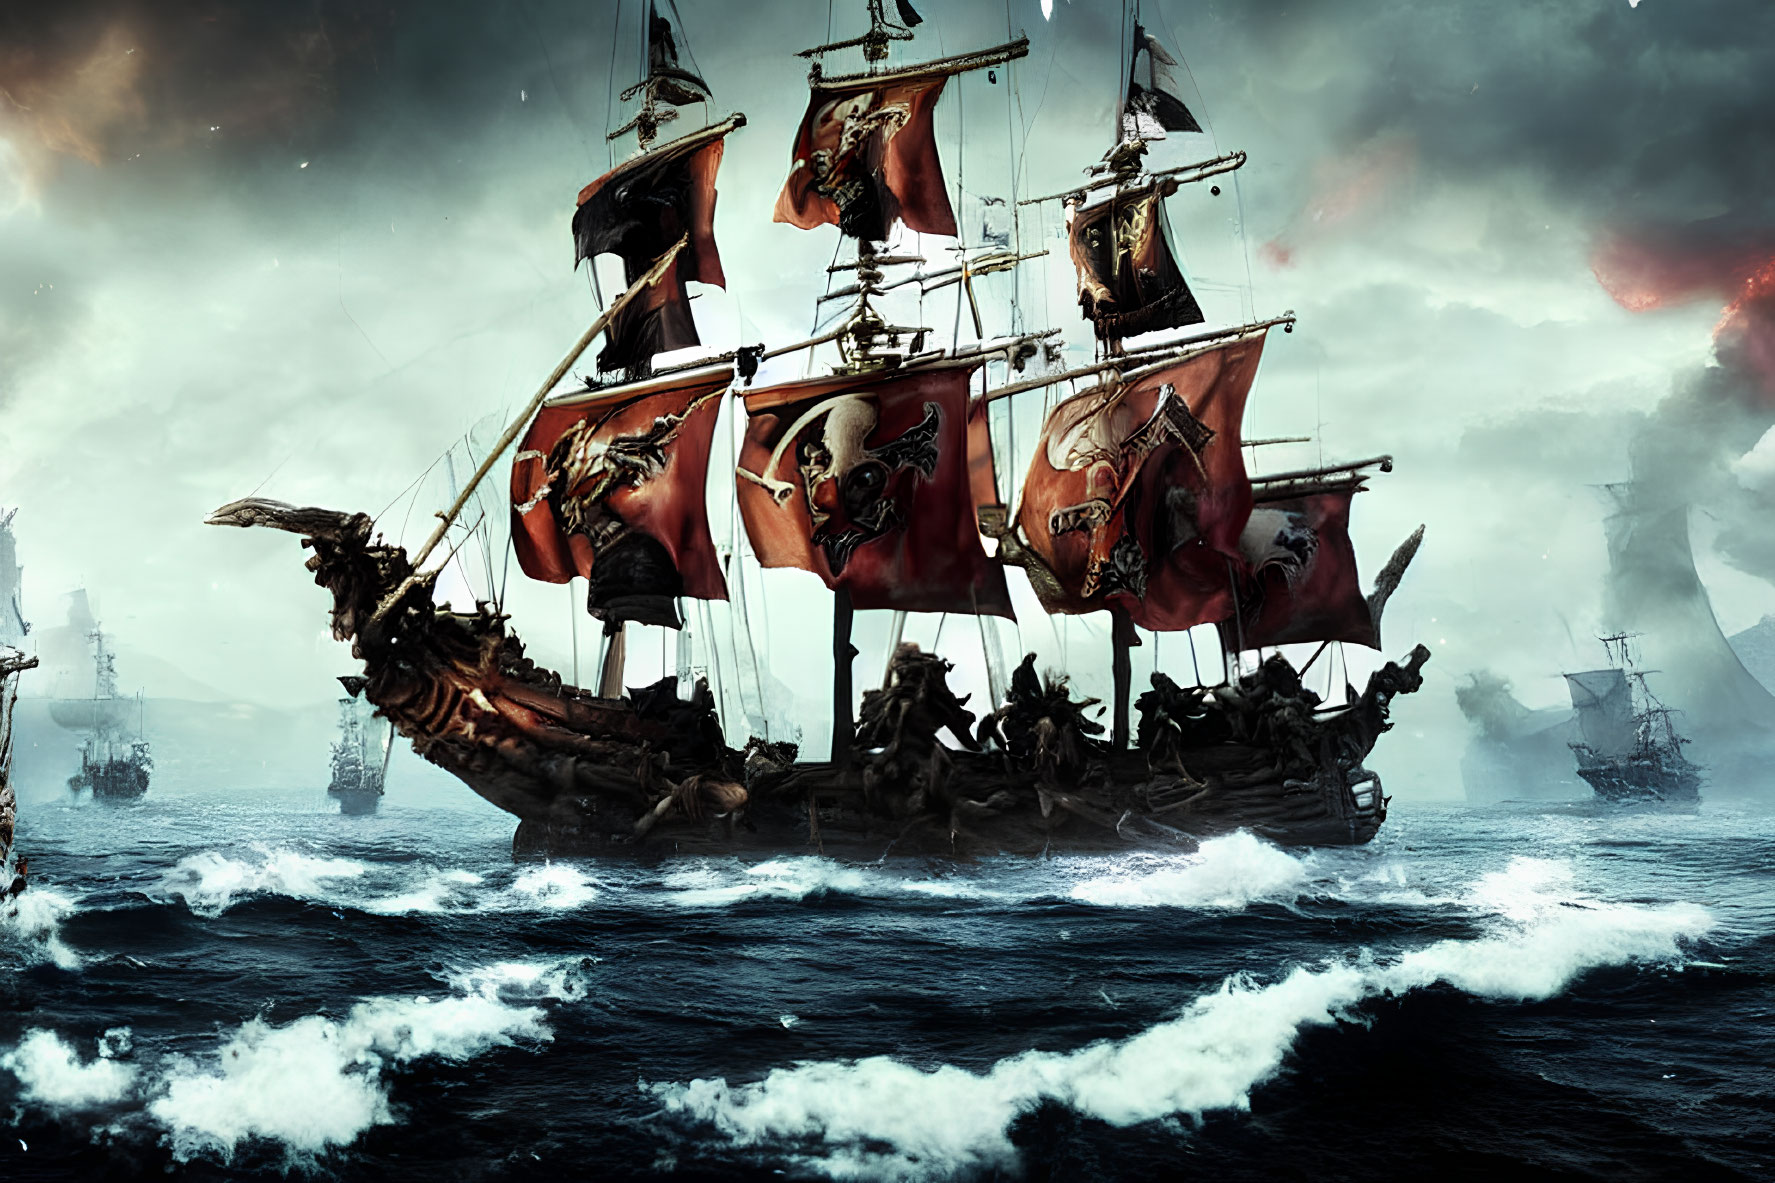 Pirate ship with skull sails in stormy seas surrounded by similar vessels